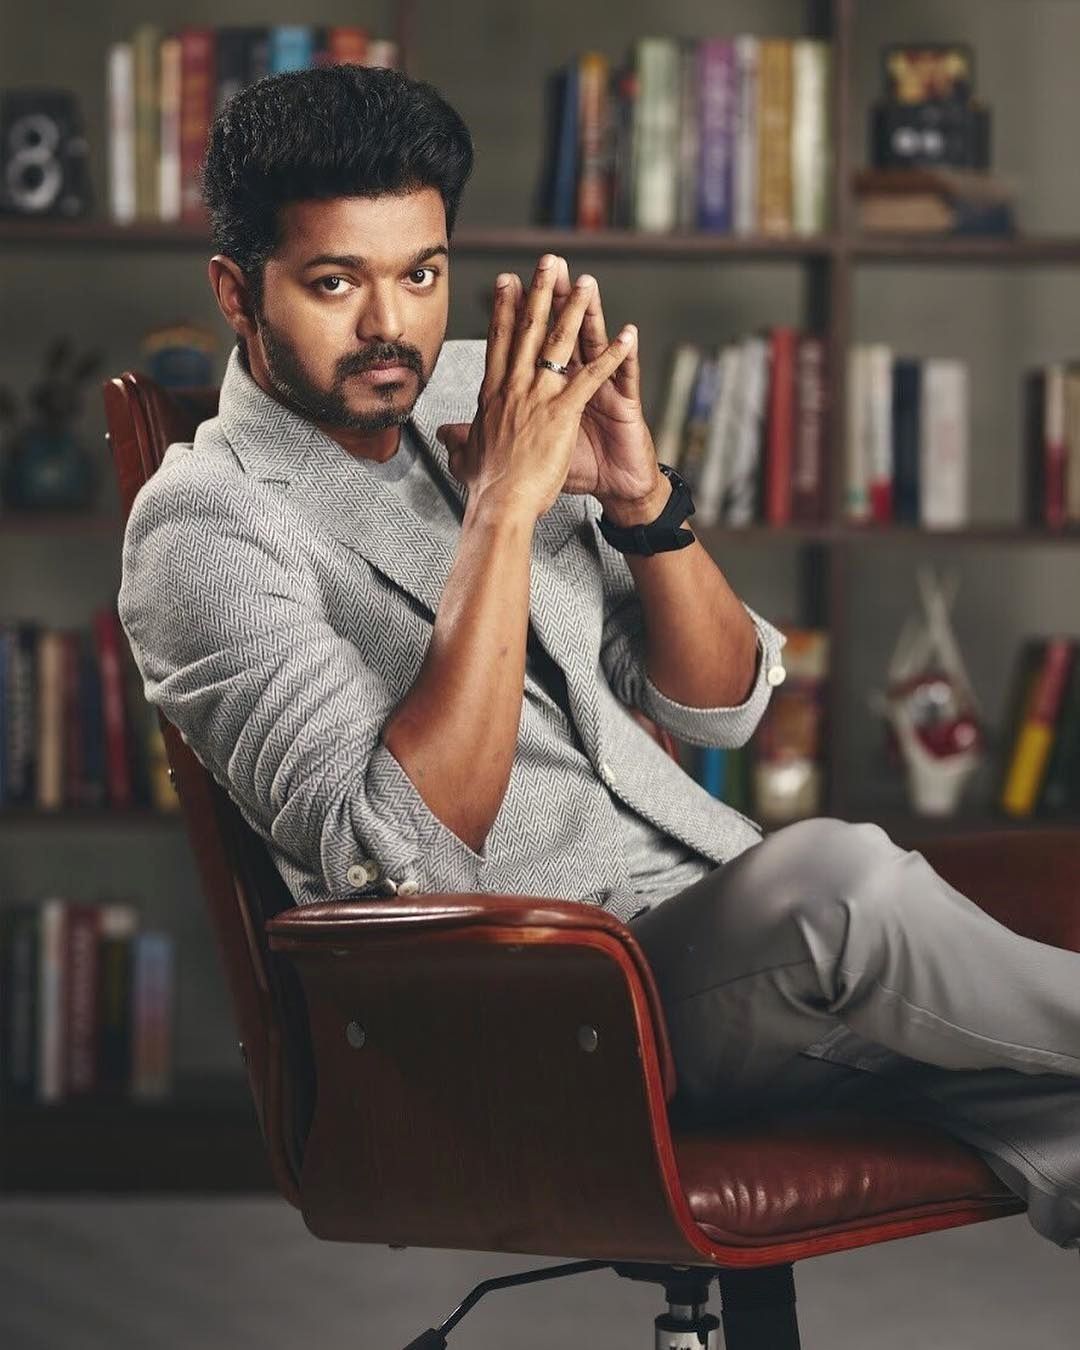 New stills of #Thalapathy #Vijay in Sarkar. Looking stylish! #thalapathyvijay #actorvijay #sarkar. Surya actor, Actor photo, Actor picture